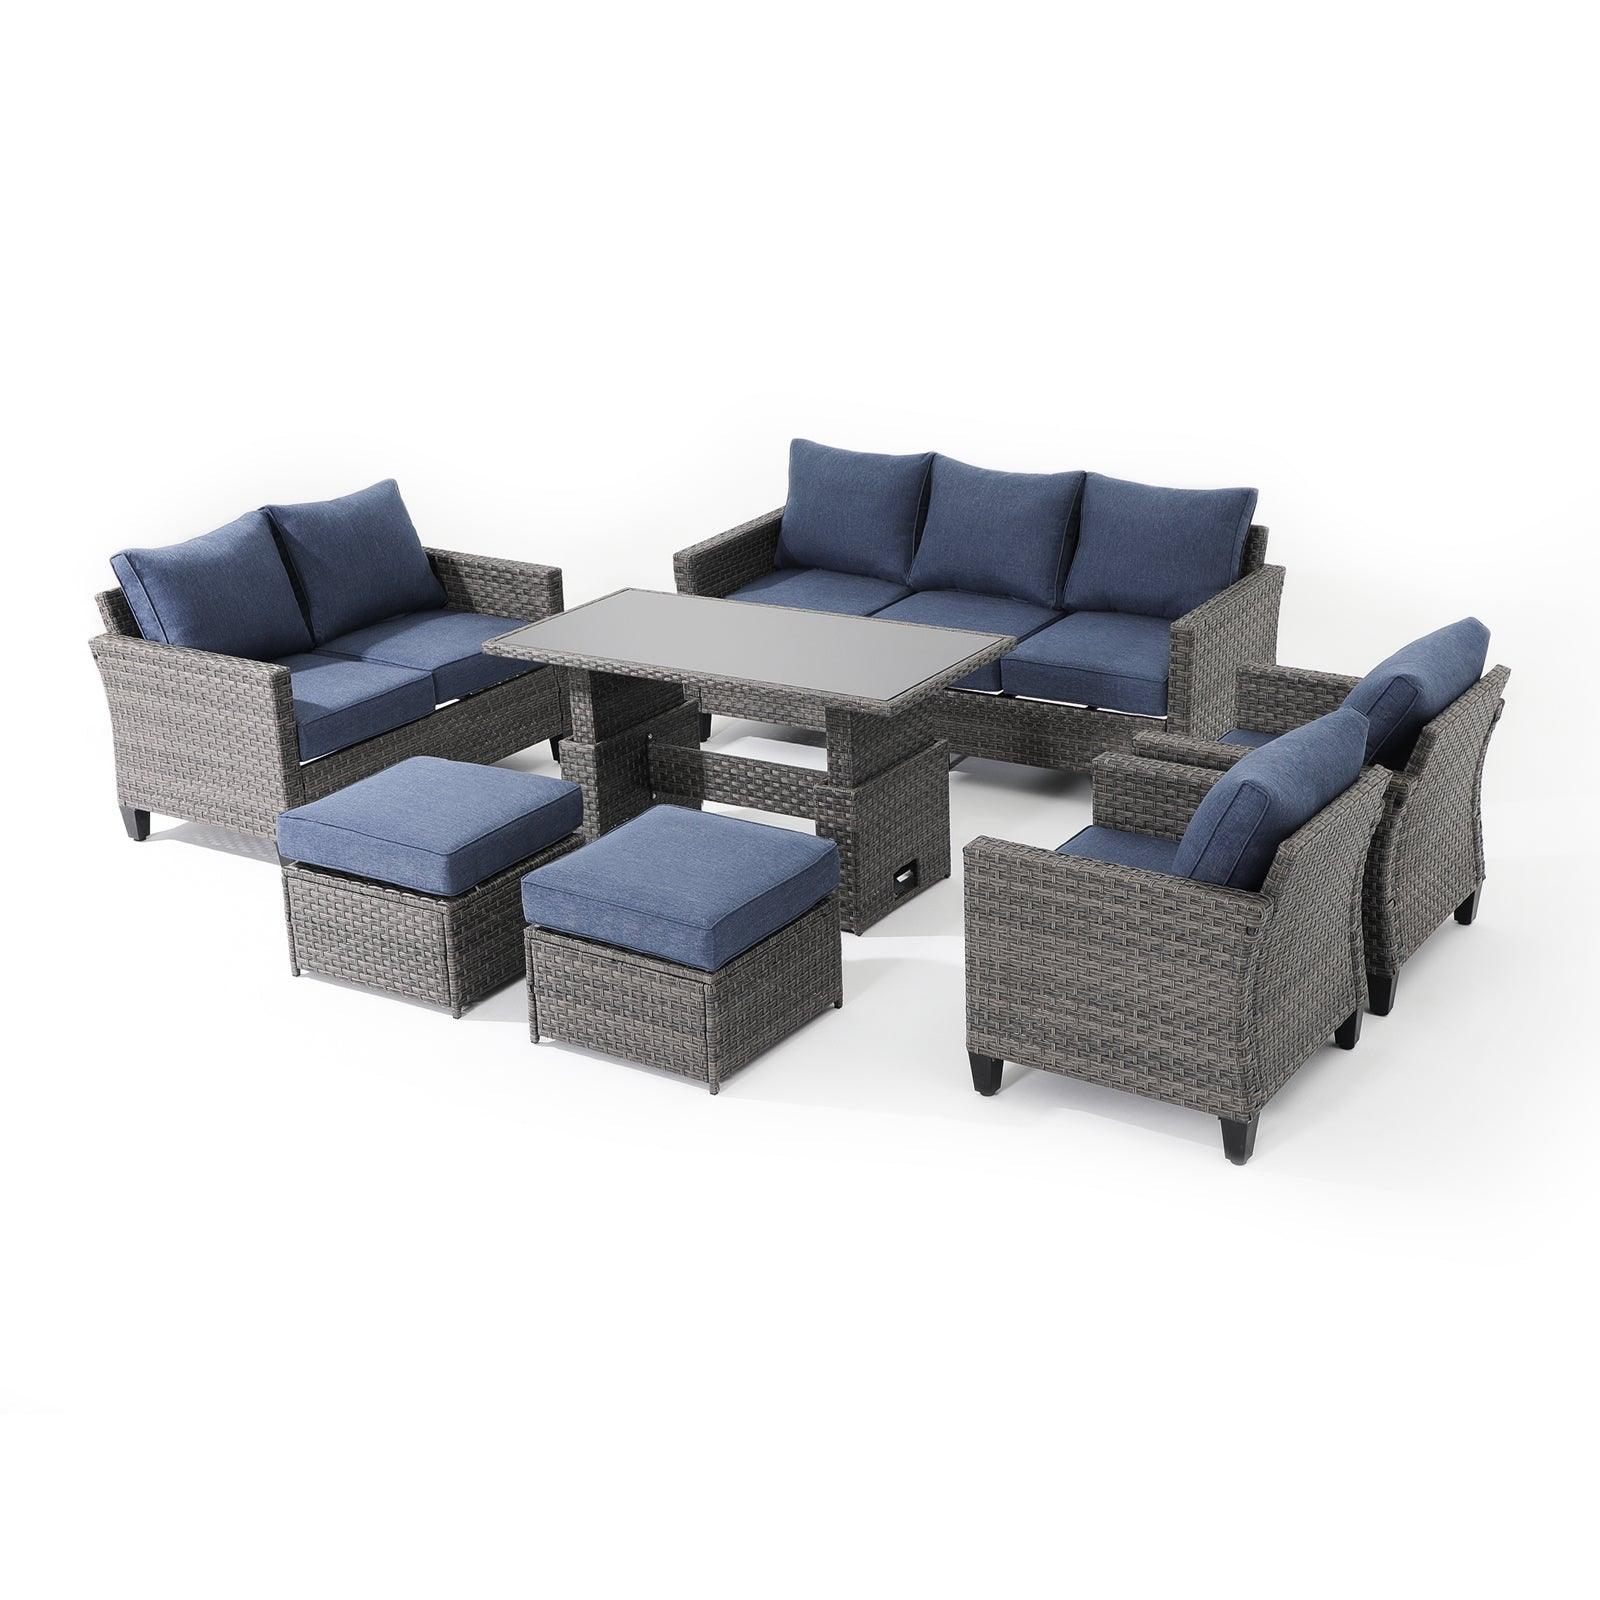 Ayia 7-Piece outdoor Sofa Set with Rattan design, Navy Blue cushions, a 3-seater sofa, 2 armchairs, 2 ottomans, 1 loveseat, 1 lift-top outdoor dining table, left - Jardina Furniture #Color_Navy Blue #style_7-pc with Ottomans & Table